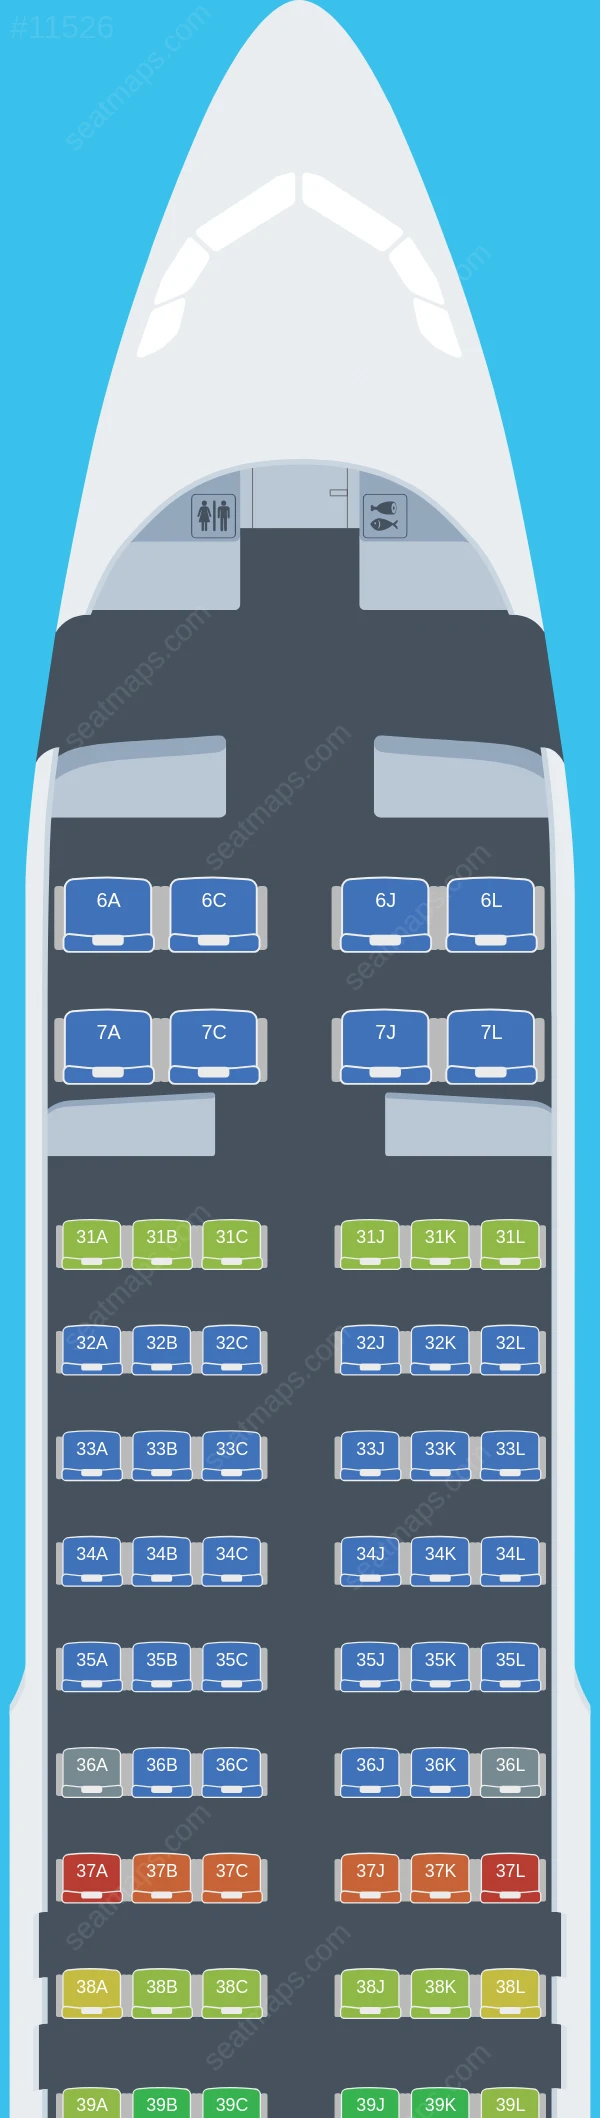 China Eastern Airbus A320neo seatmap preview